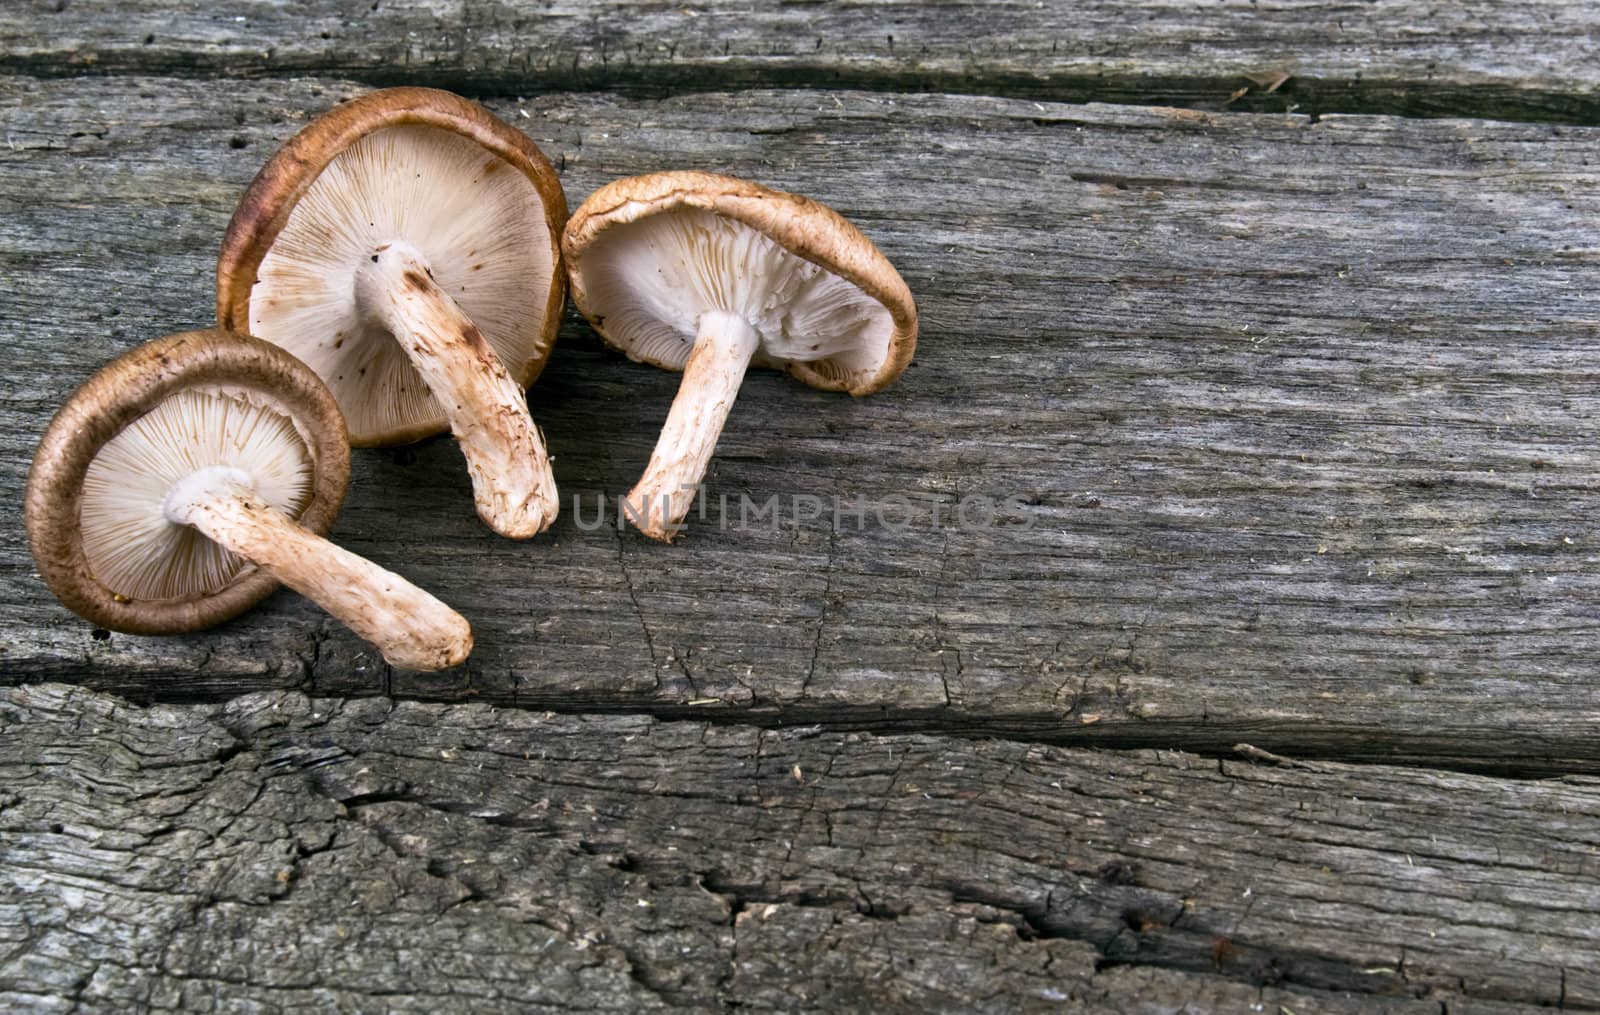 mushrooms on wood kitchen table by vician